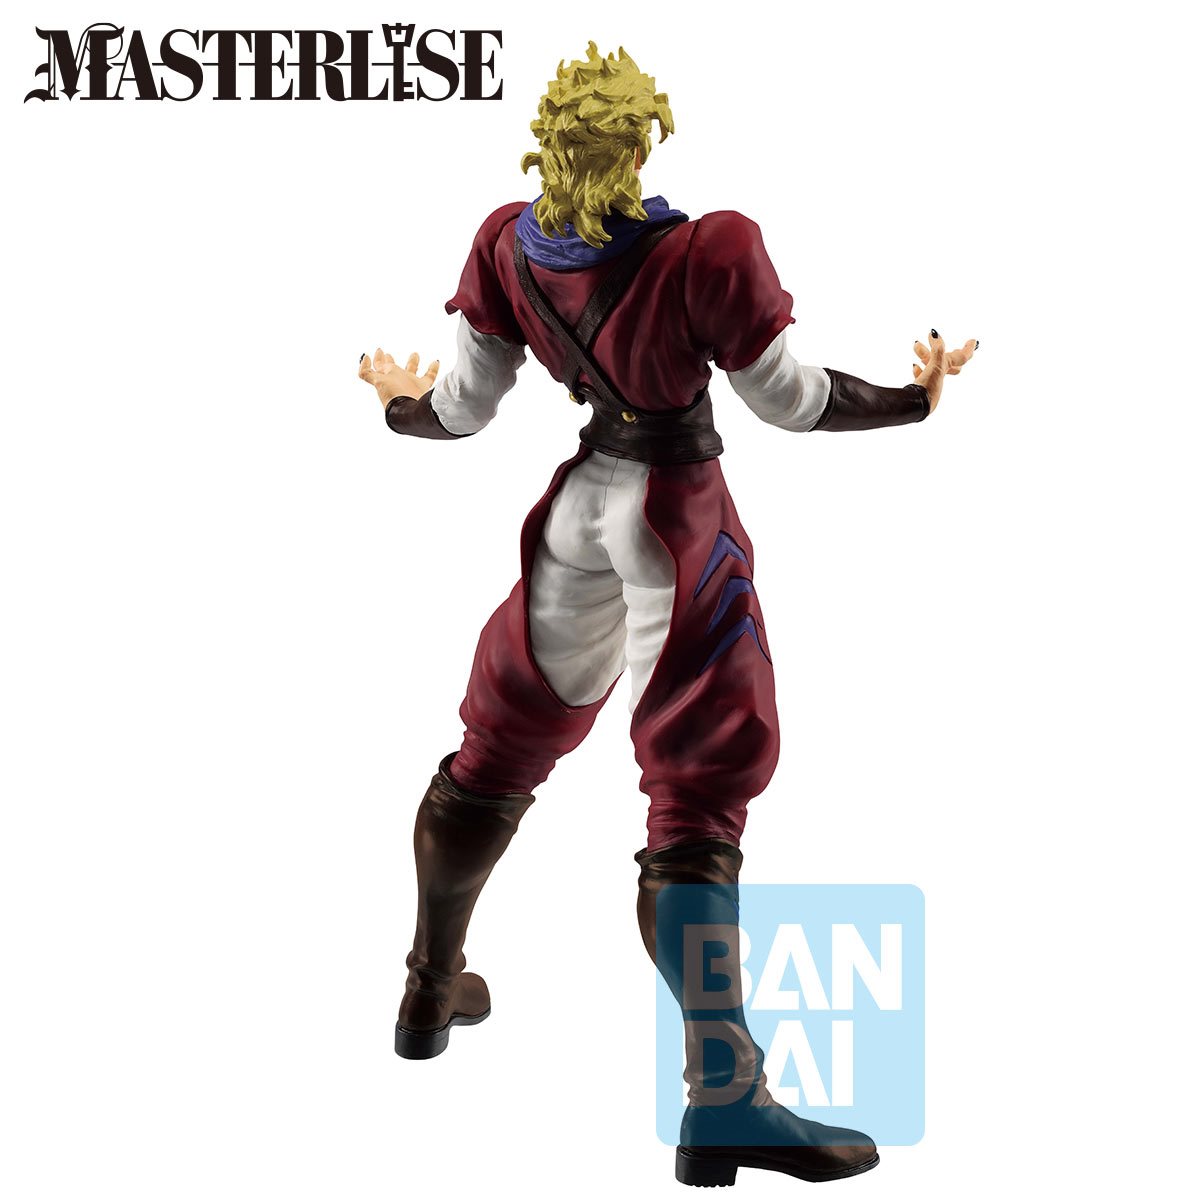 This figure features Dio Brando from the Masterlise series presented by Ichiban Kuji. The figure features the iconic Dio pose with arms spread, palms open and stiff.